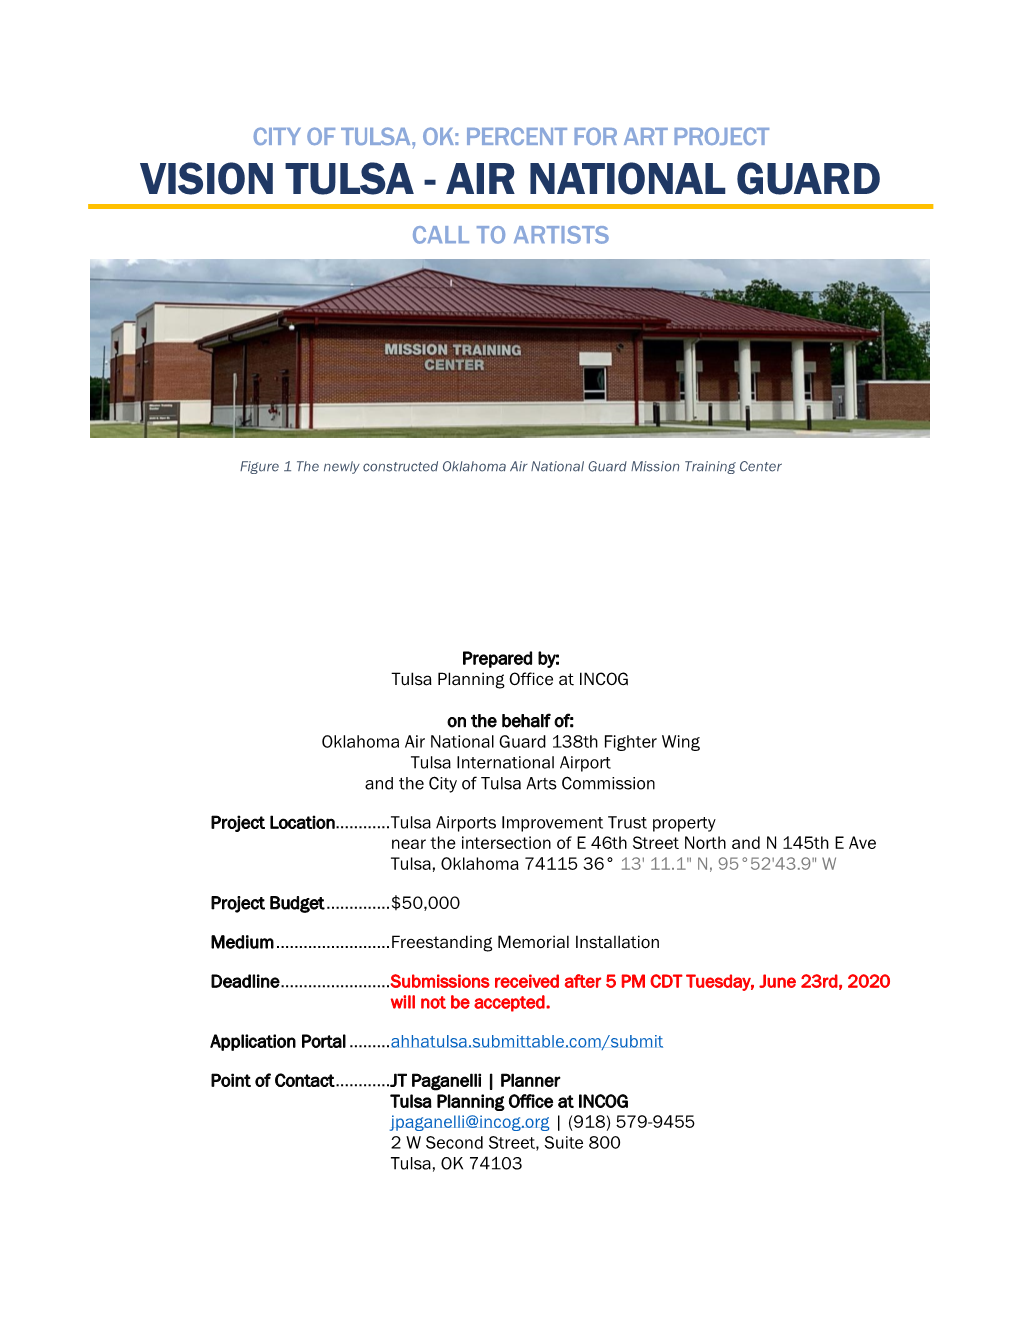 Air National Guard Call to Artists